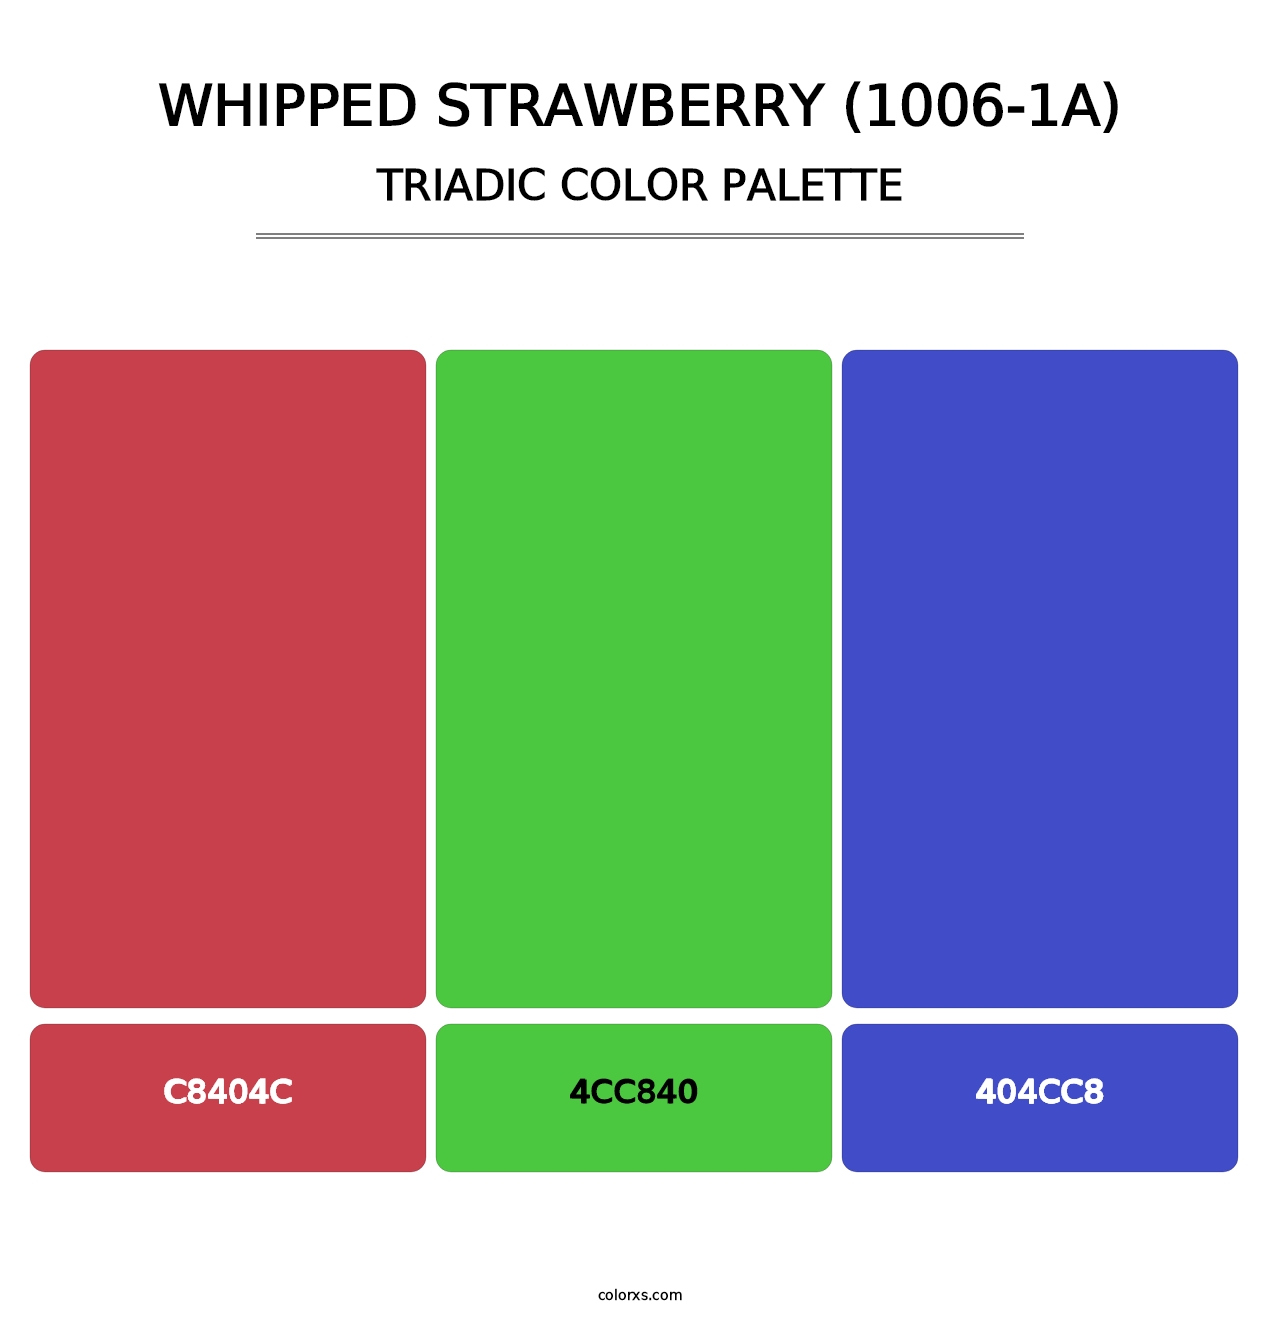 Whipped Strawberry (1006-1A) - Triadic Color Palette